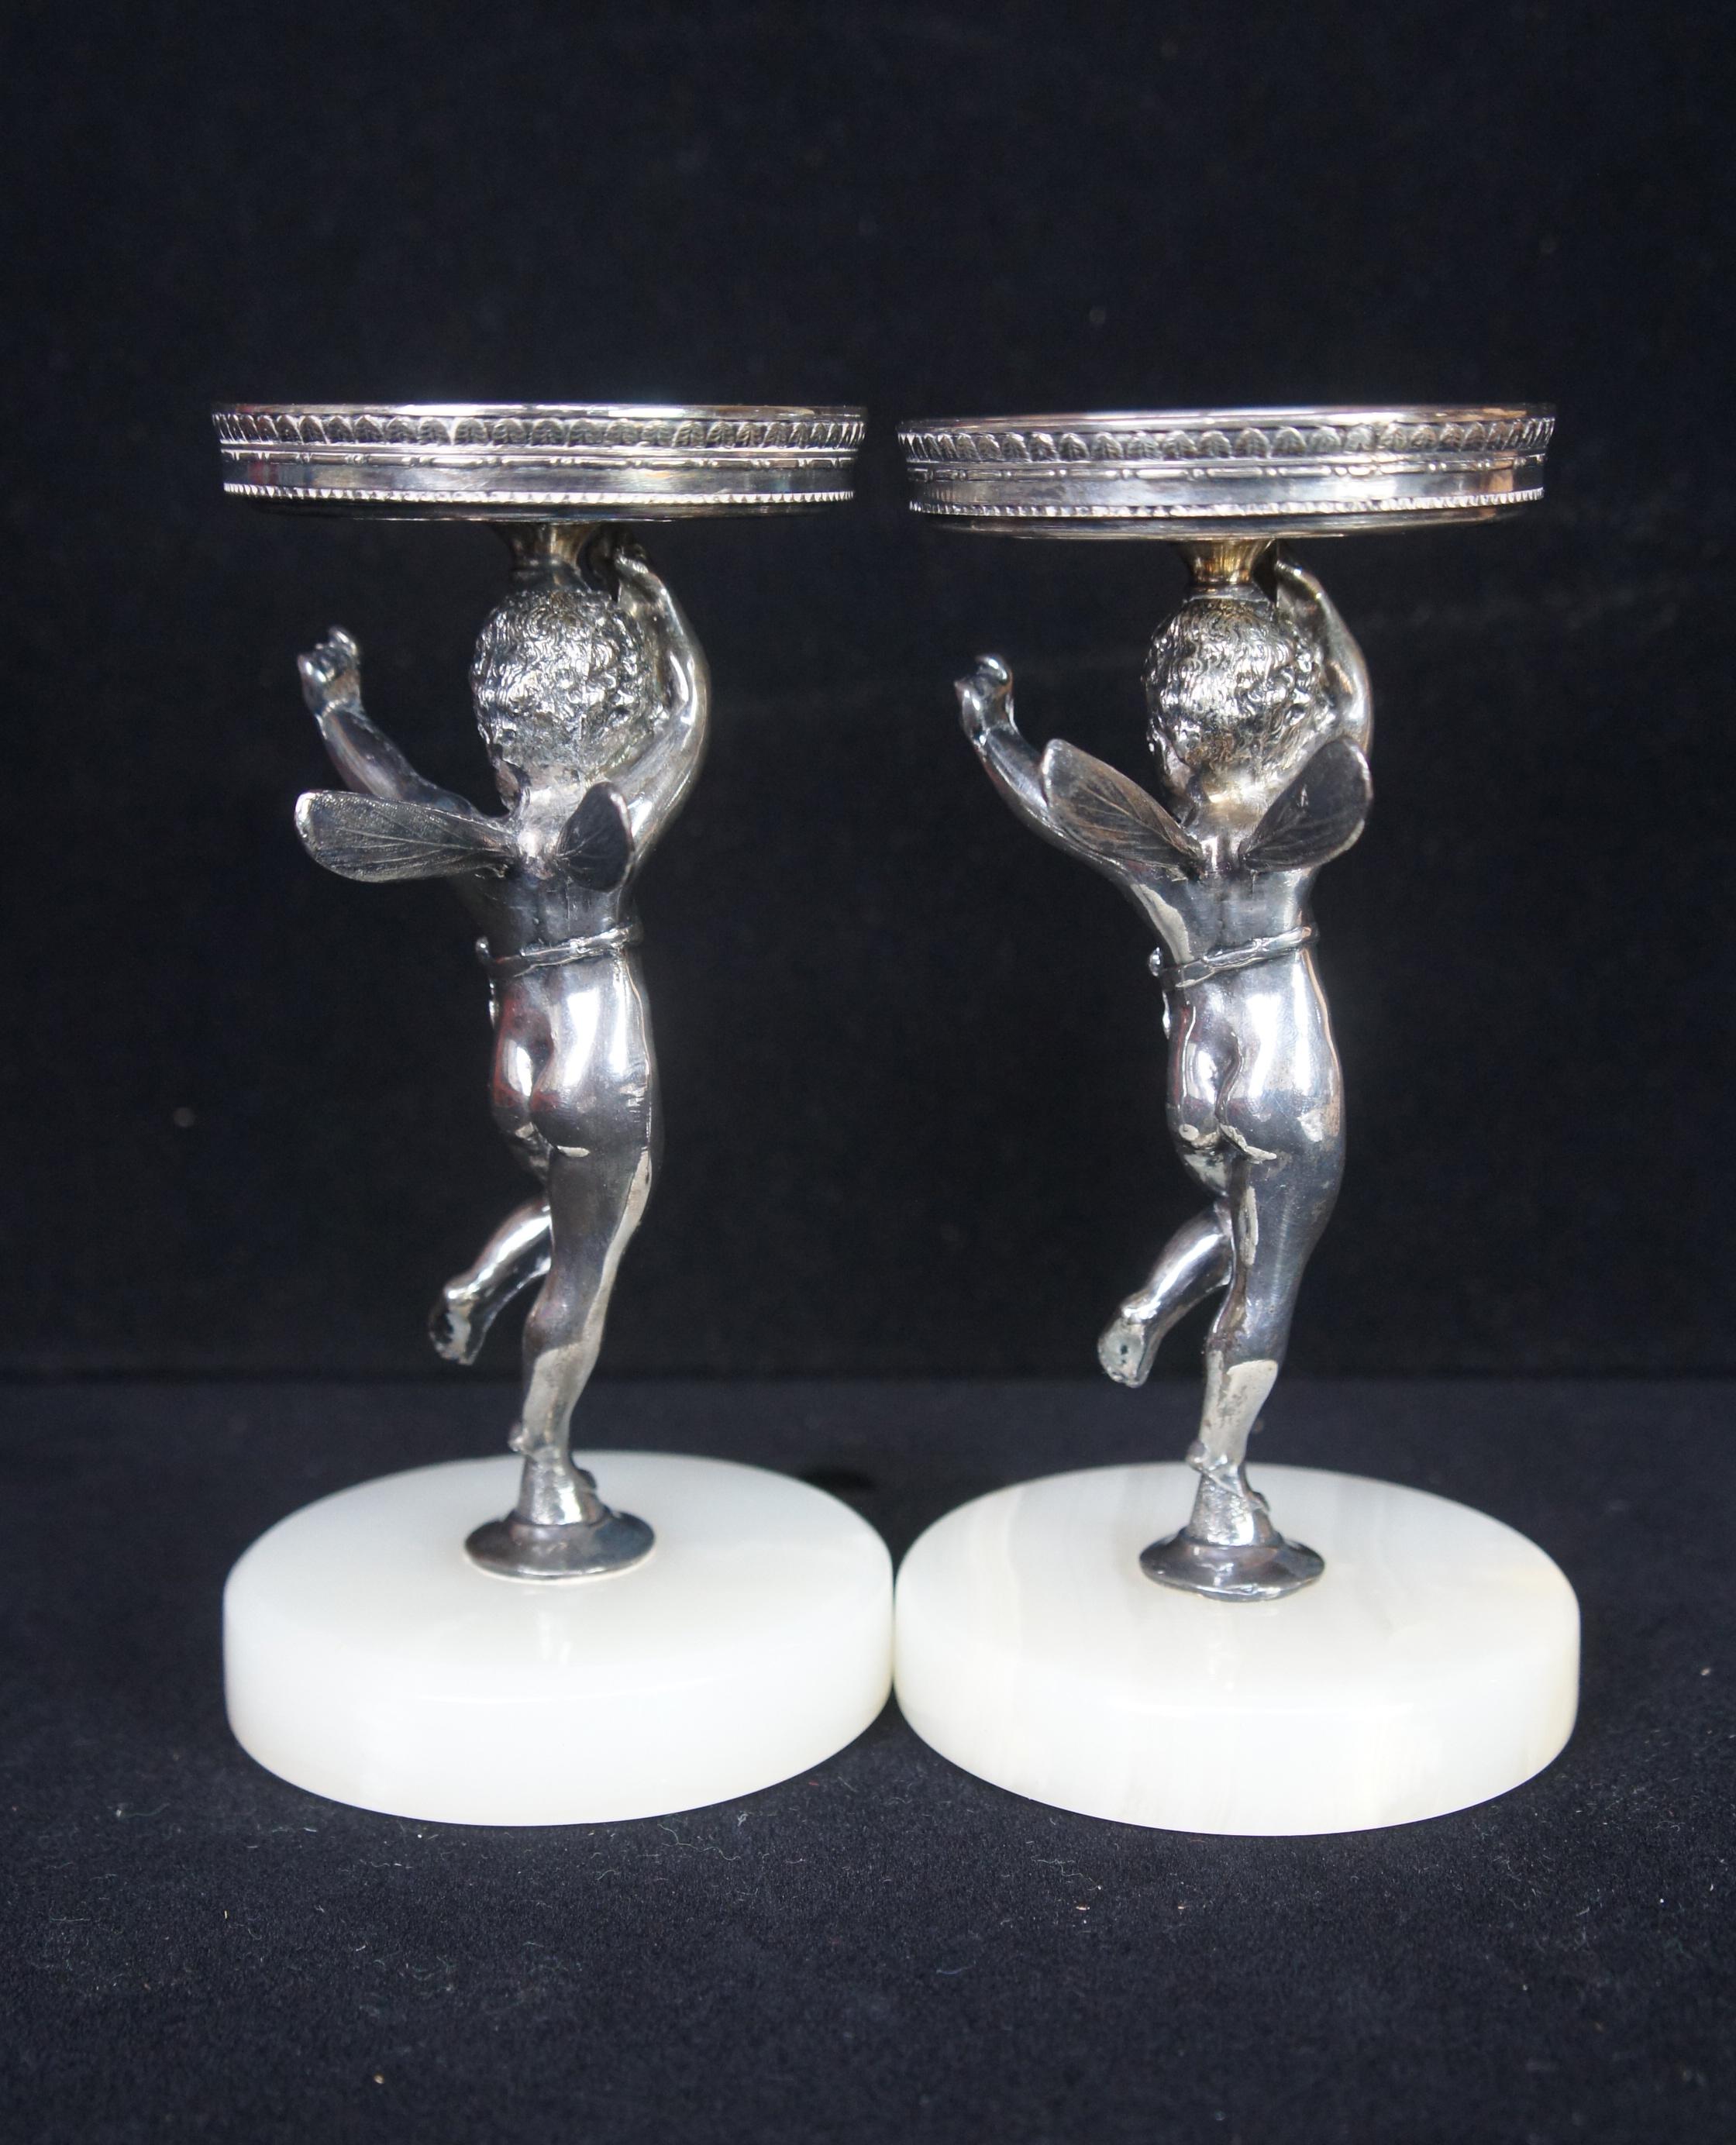 2 Art Nouveau Figural Fairy Cherub Silver Plated Marble Glass Candy Compotes 2